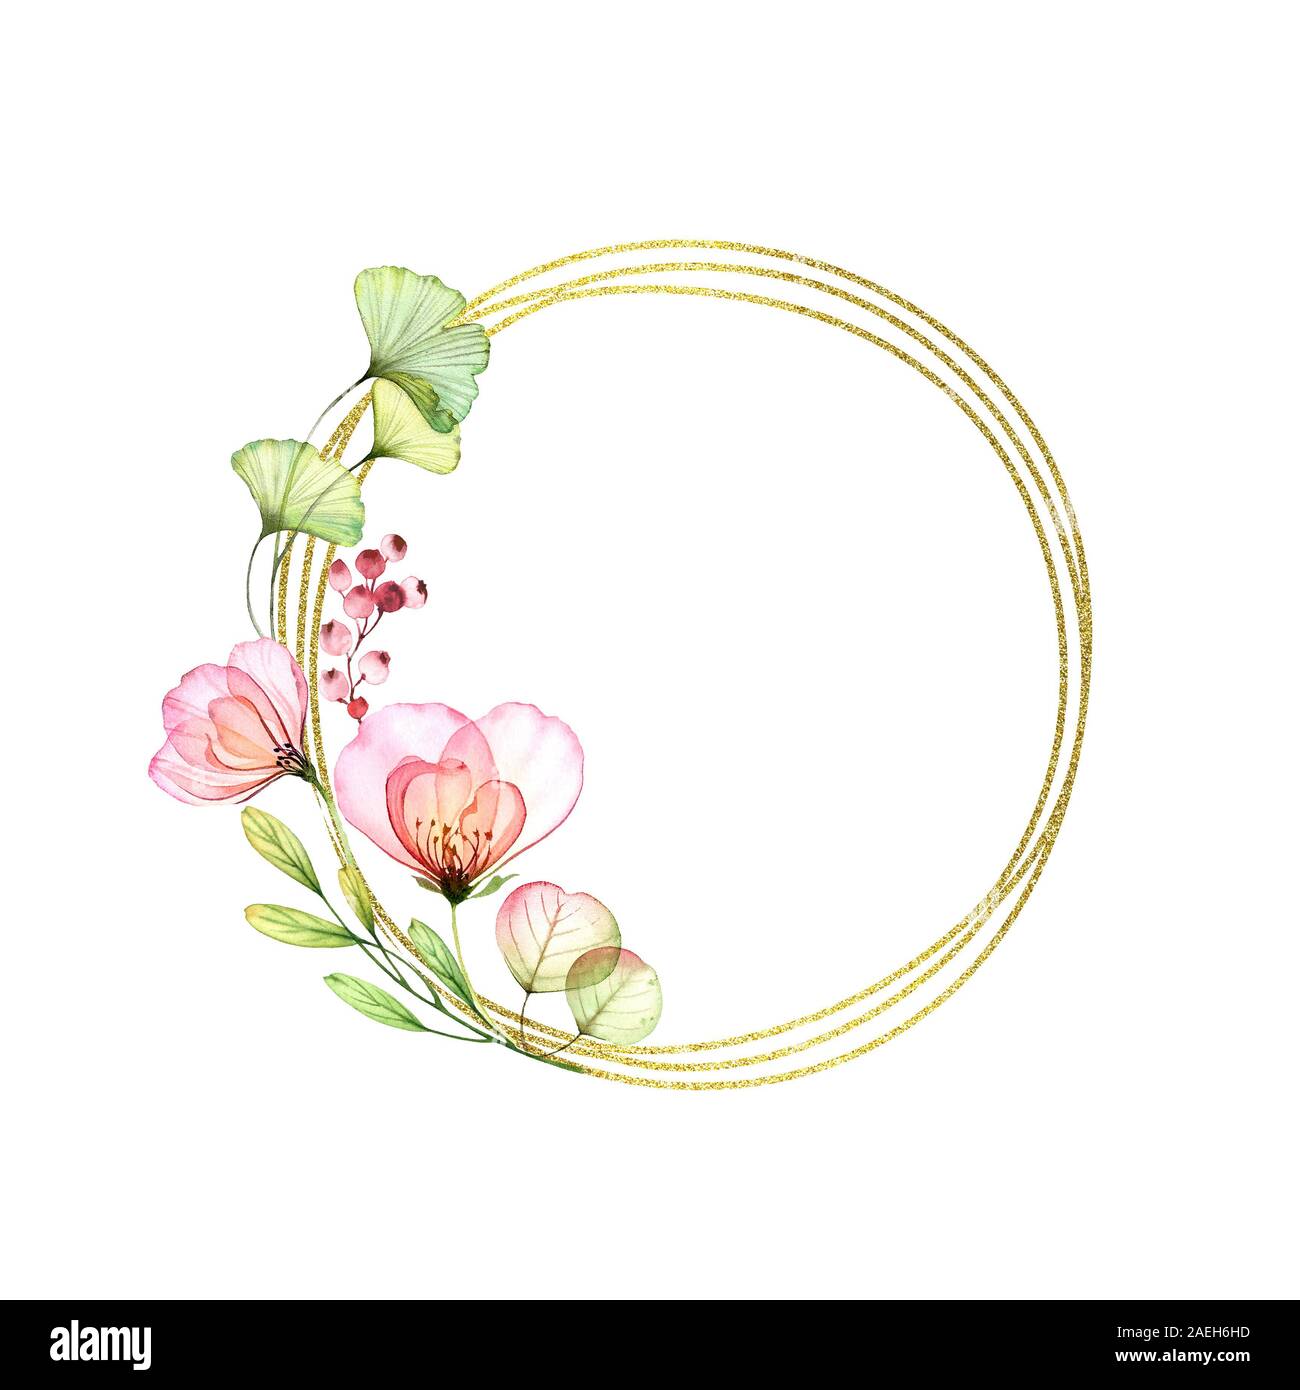 Transparent Rose golden glitter round frame with place for text. Watercolor hand painted illustration. Circular composition with flowers and leaves Stock Photo